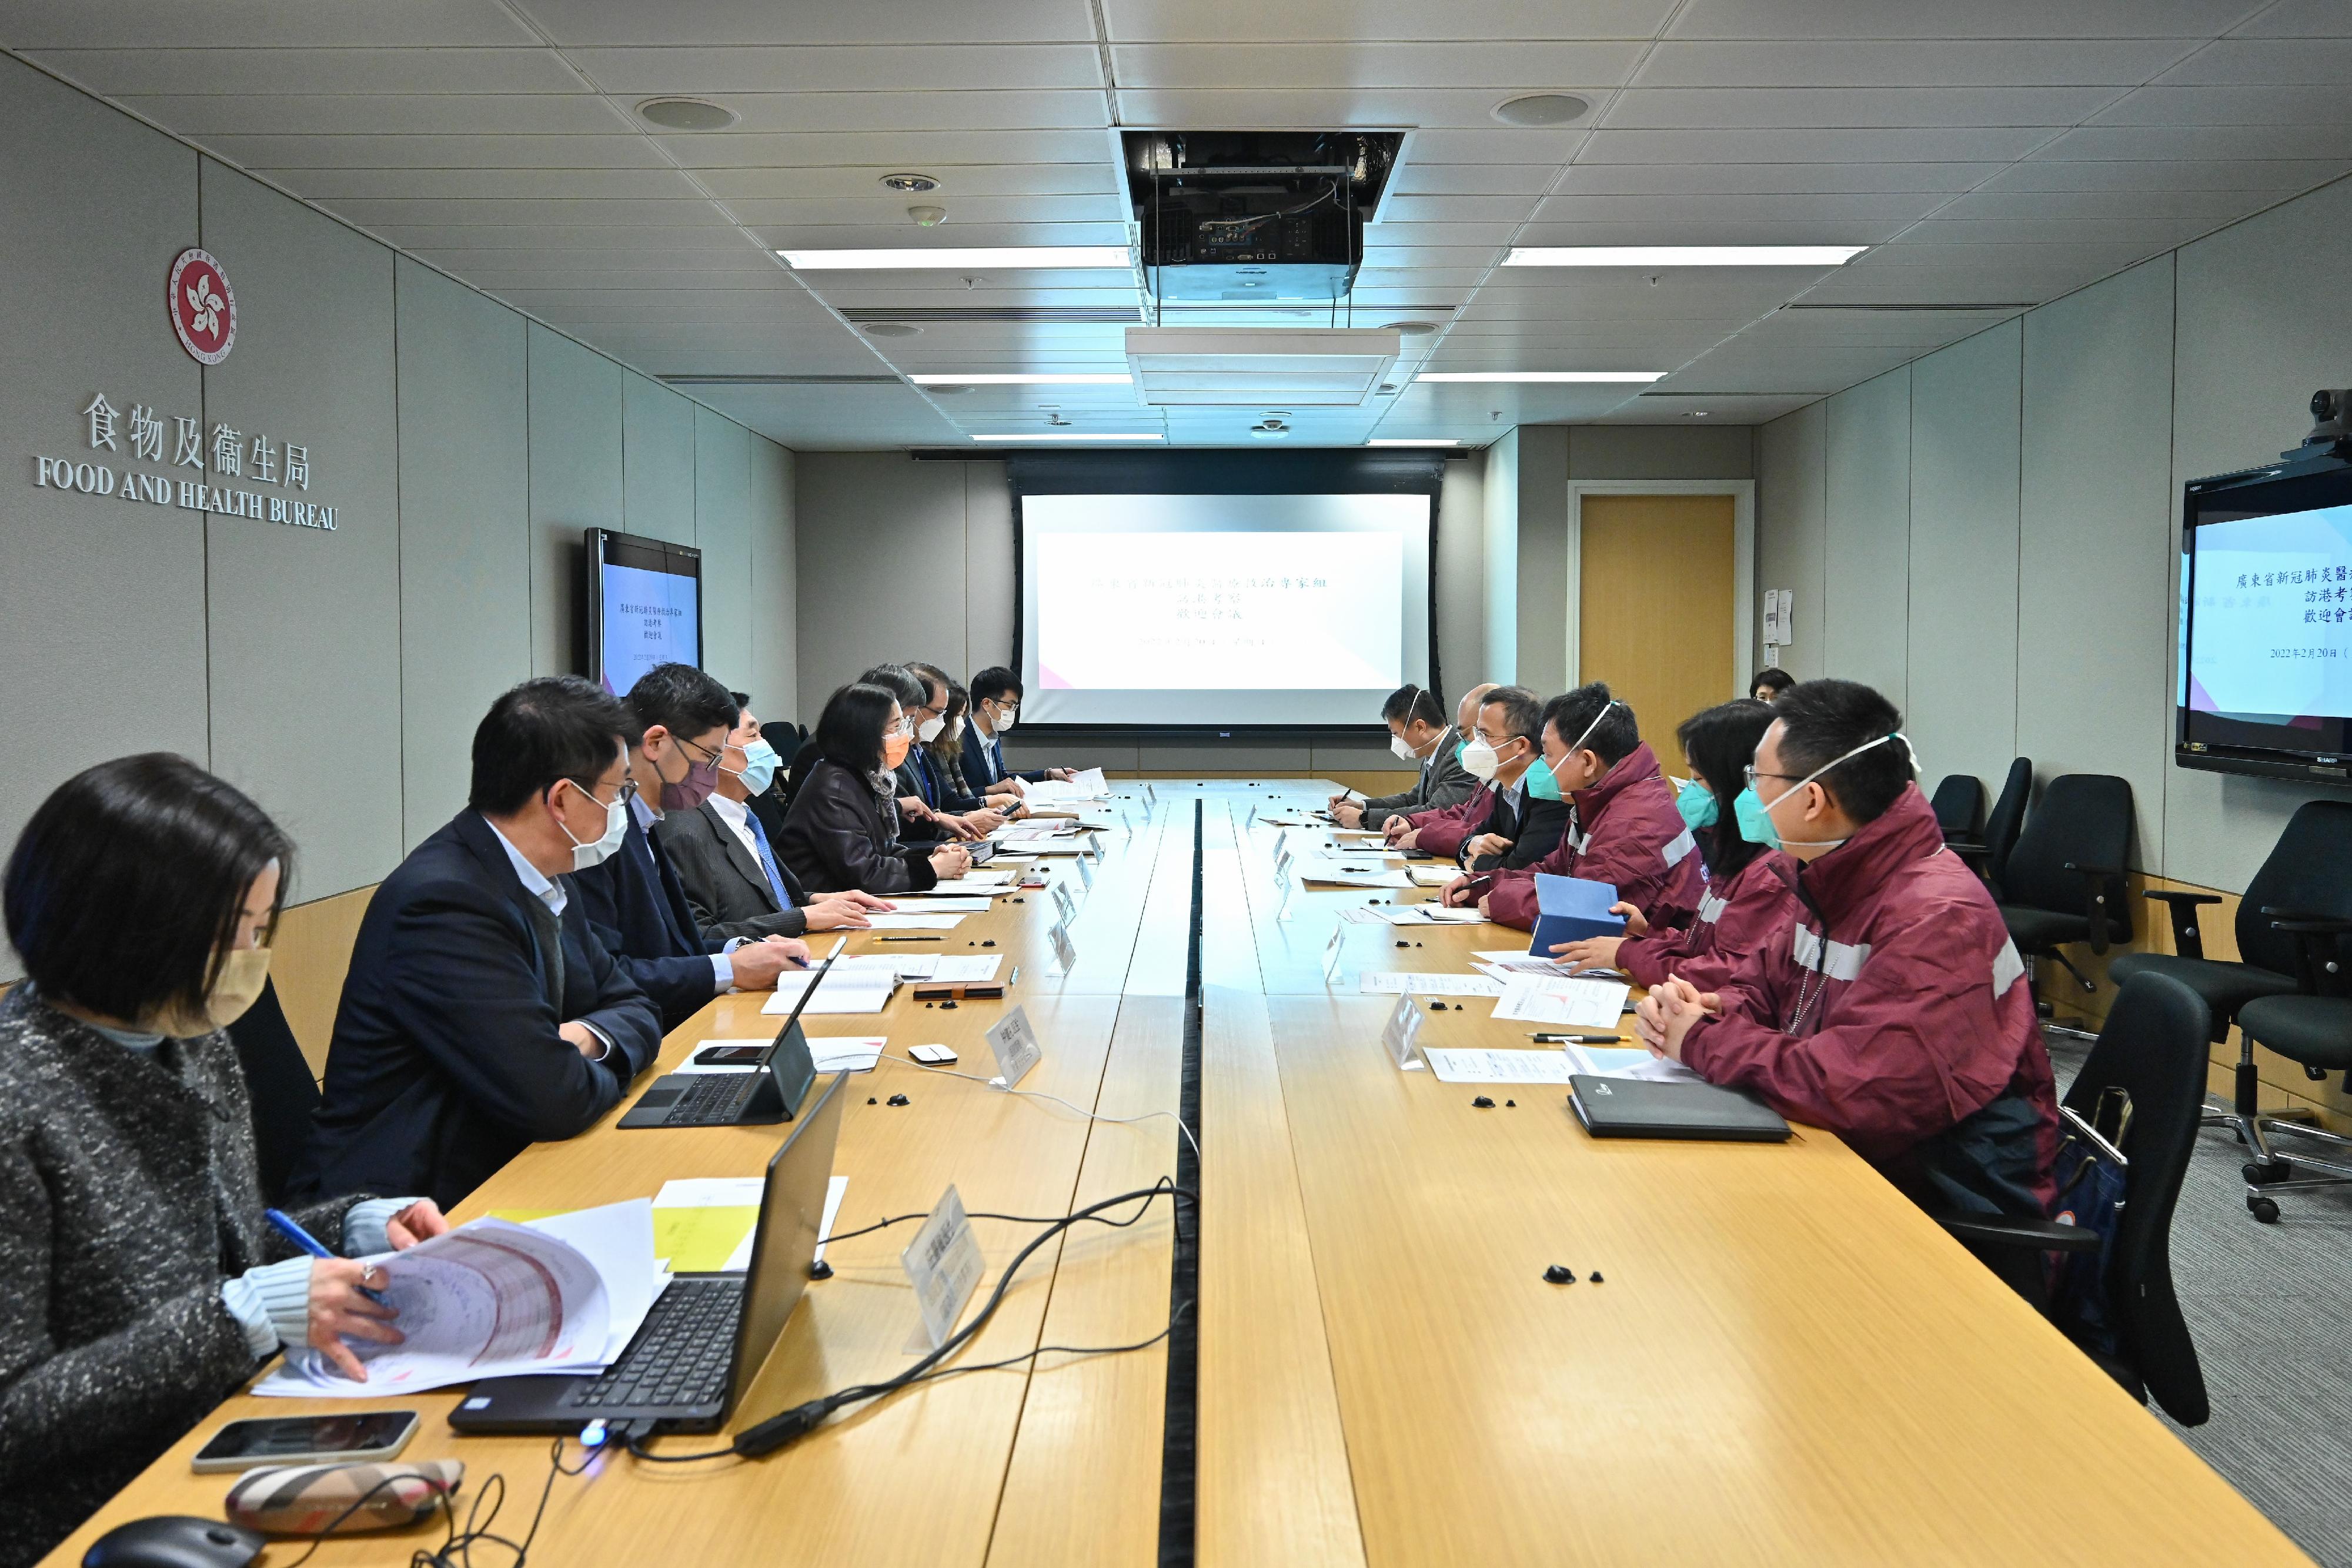 The Food and Health Bureau (FHB) and the Hospital Authority (HA) held a meeting with the Guangdong COVID-19 medical expert delegation (expert delegation) at the Central Government Offices this morning (February 20). Photo shows the Secretary for Food and Health, Professor Sophia Chan (fifth left); the Permanent Secretary for Food and Health (Health), Mr Thomas Chan (sixth left); the Project Director of the Chinese Medicine Hospital Project Office, Dr Cheung Wai-lun (seventh left); the Chairman of the HA, Mr Henry Fan (fourth left); the Chief Executive of the HA, Dr Tony Ko (third left); the HA Director (Quality and Safety), Dr Chung Kin-lai (second left), and other representatives of the FHB and the HA sharing experience in treating COVID-19 patients with the Deputy Director General of the Health Commission of Guangdong Province, Mr Zhang Yurun (fourth right); the second level consultant of the Health Commission of Guangdong Province, Mr Sun Baoshan (sixth right); the Leader of the expert delegation, Mr Qin Tiehe (third right); the Deputy Leader of the expert delegation, Mr Li Yimin (fifth right); members of the expert delegation, Ms Wang Shouhong (second right) and Mr Xu Yonghao (first right) in the meeting.